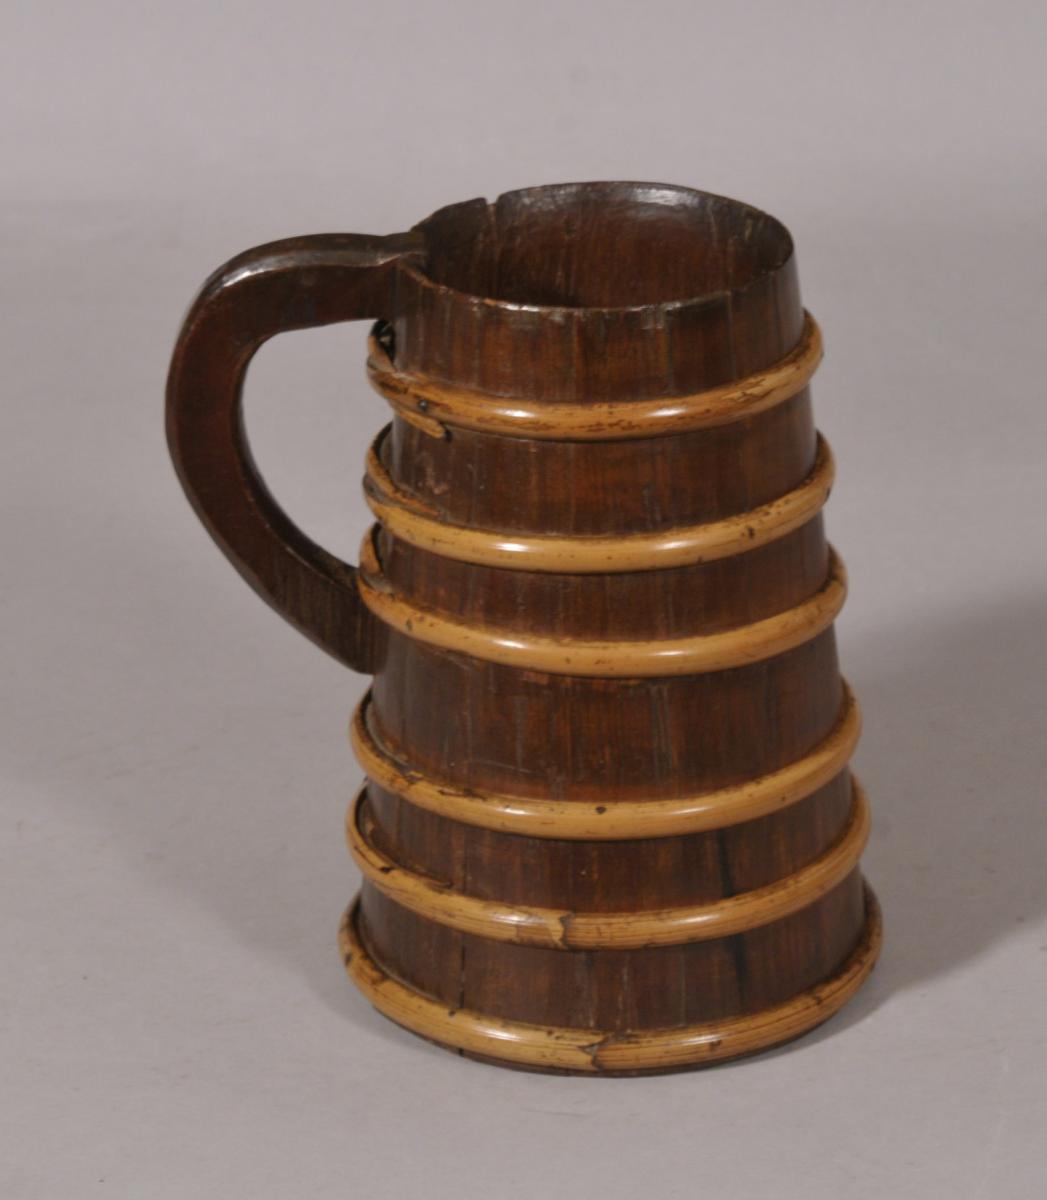 S/5787 Antique Treen 19th Century Scottish Cedar Wood Ale Flagon with Willow Bands